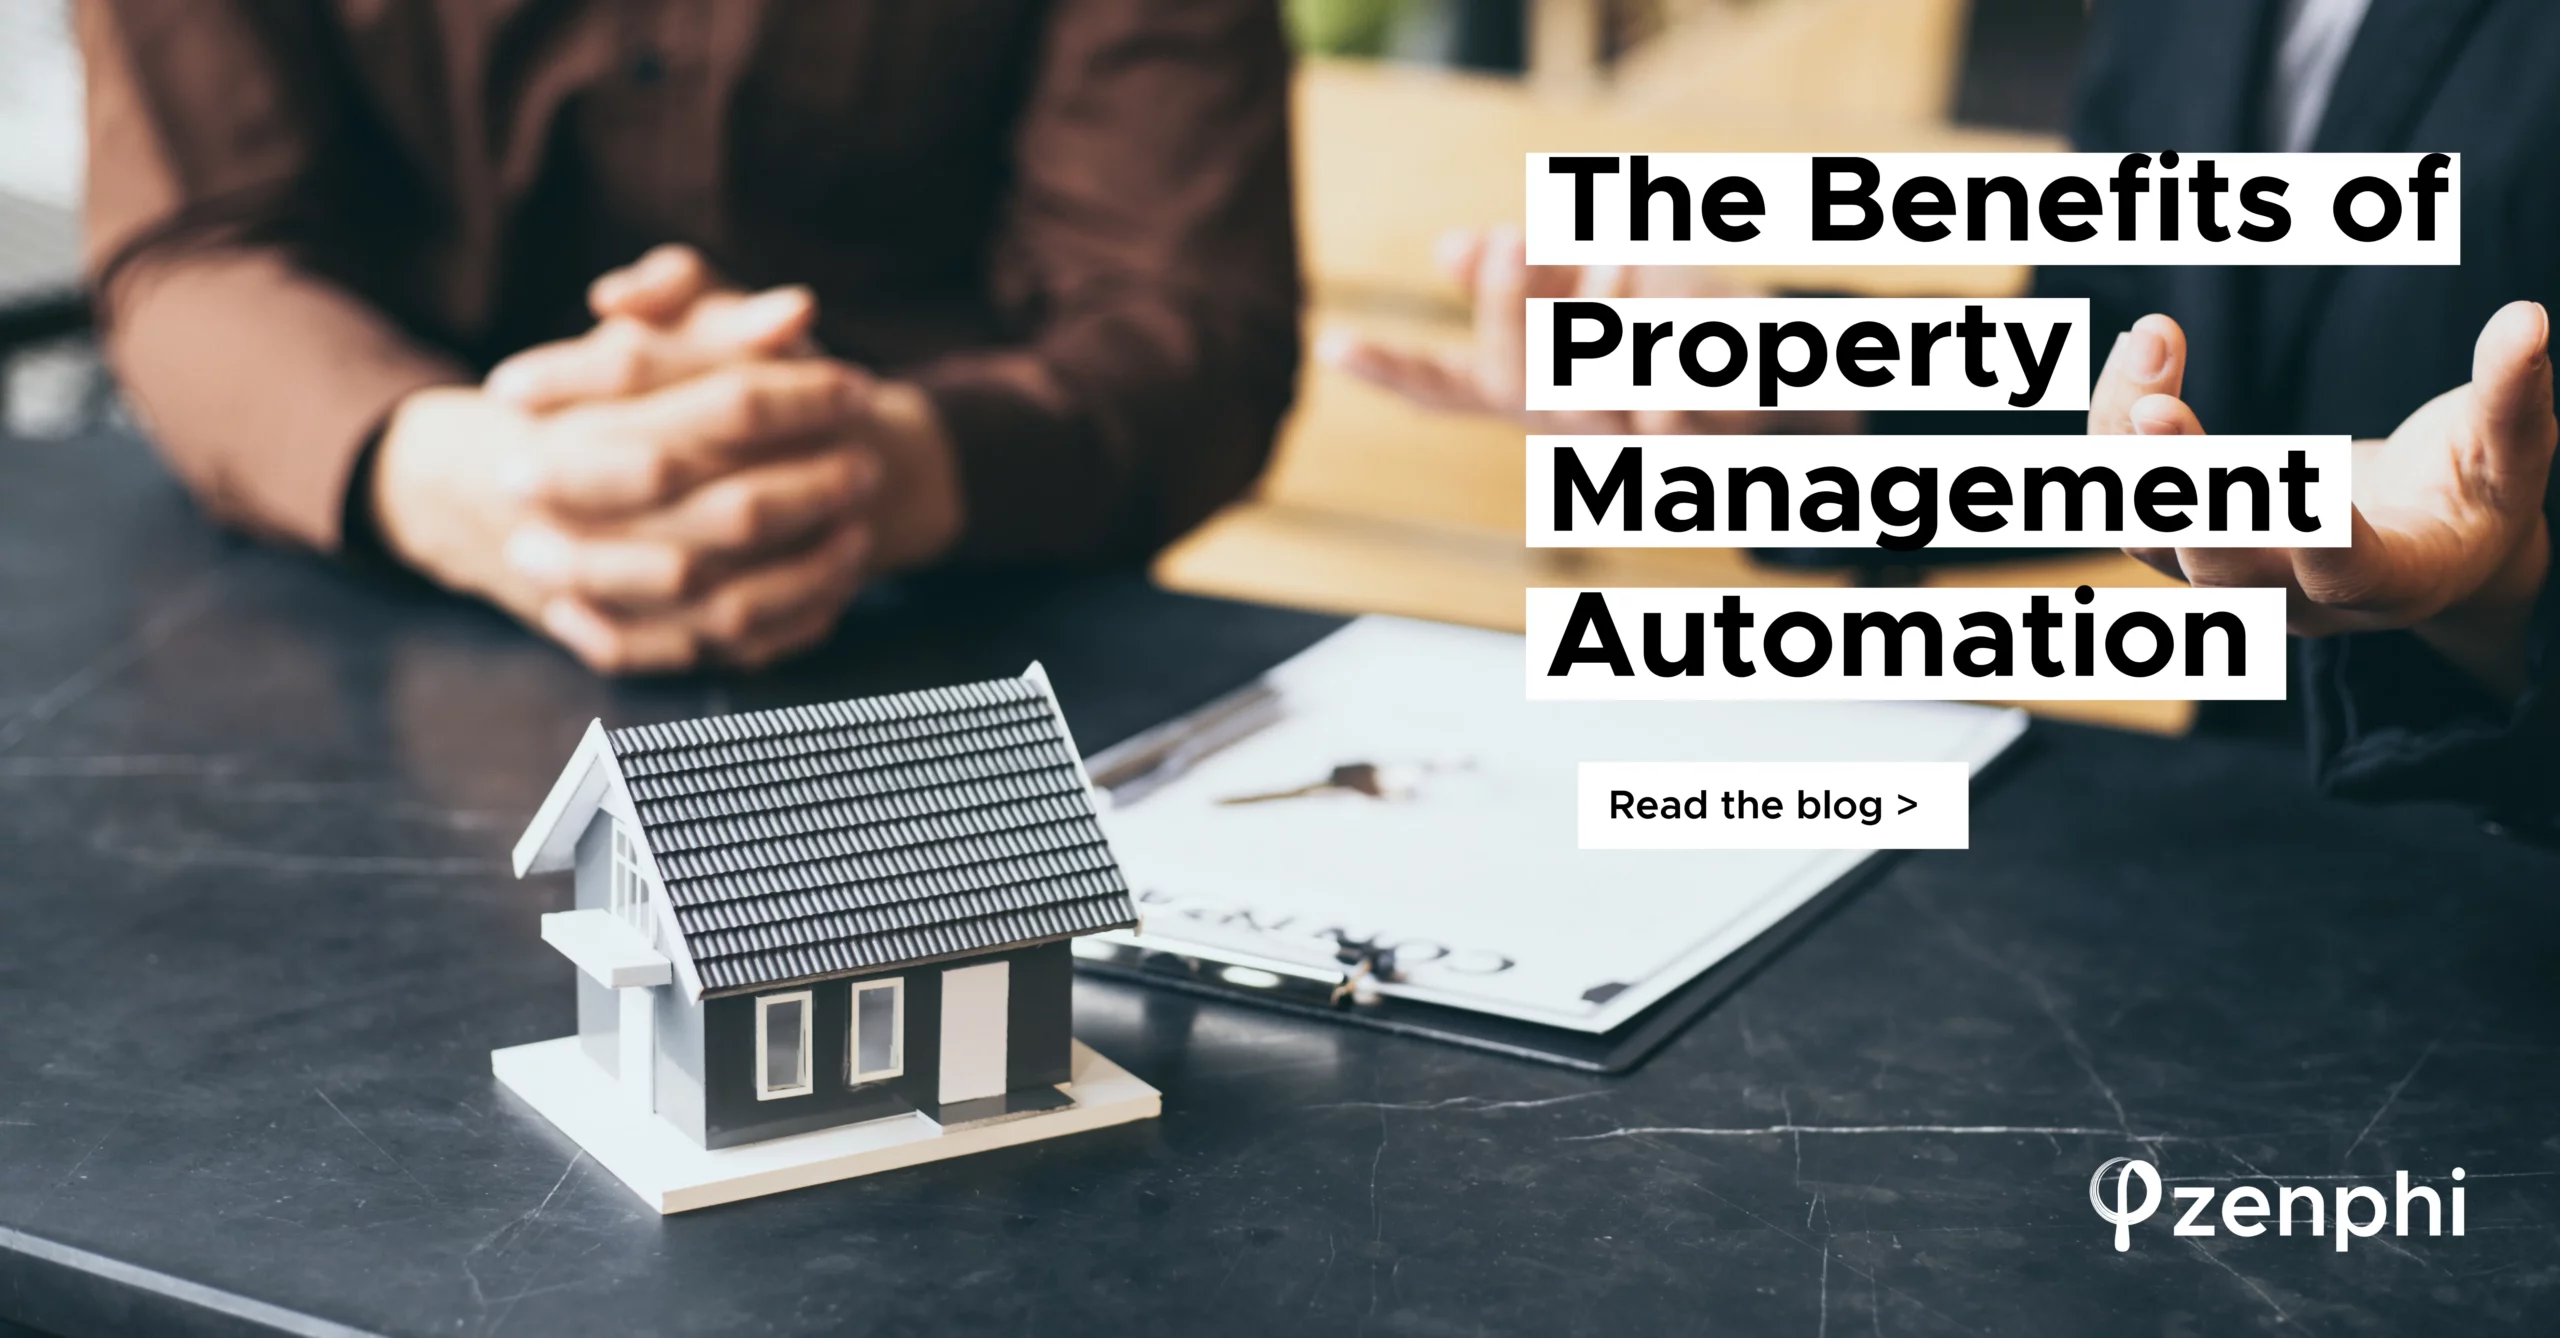 Property management automation is an effective strategy for improving efficiency, reducing costs, and enhancing the resident experience.